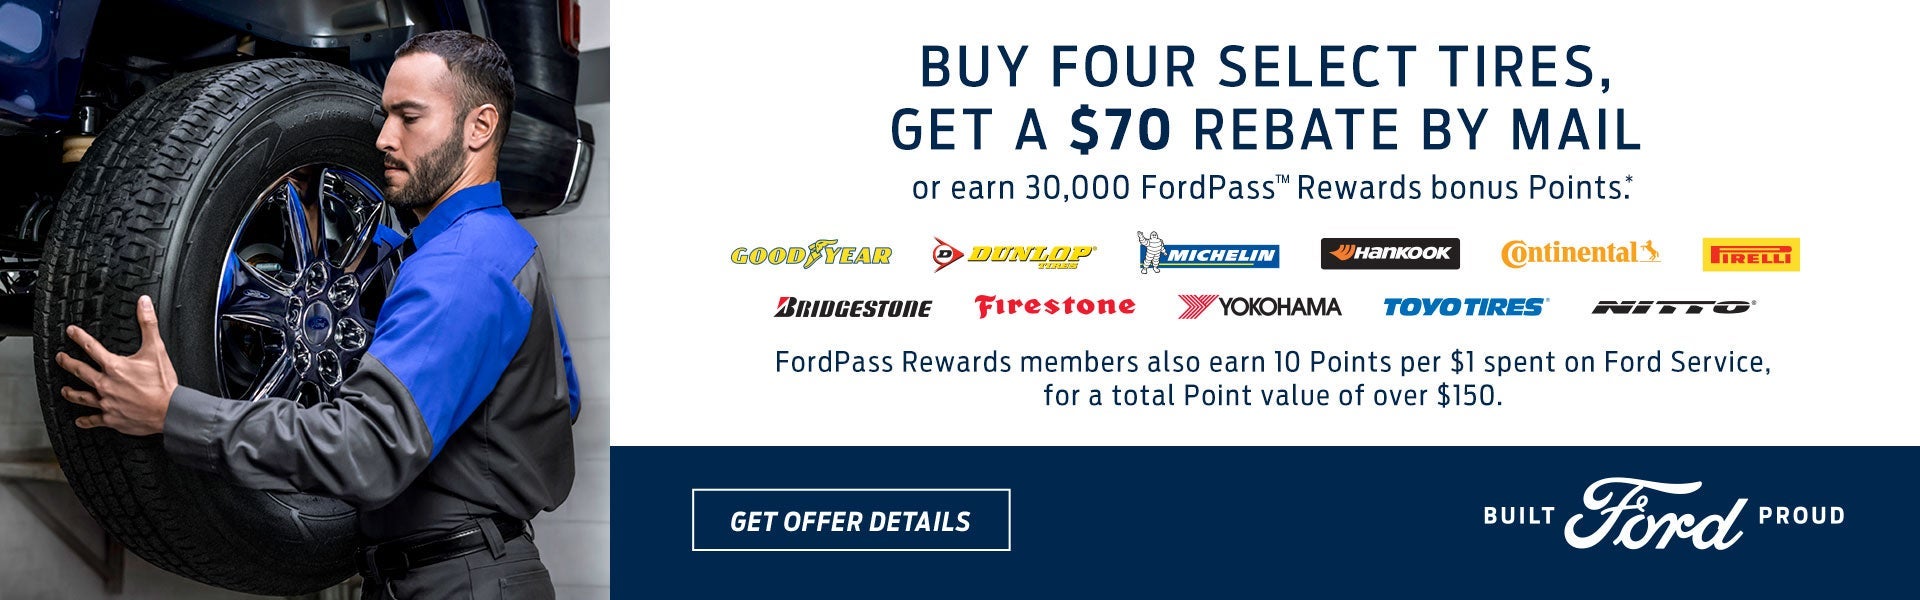 Get $70 Rebate | Sarchione Ford of Randolph in Randolph OH